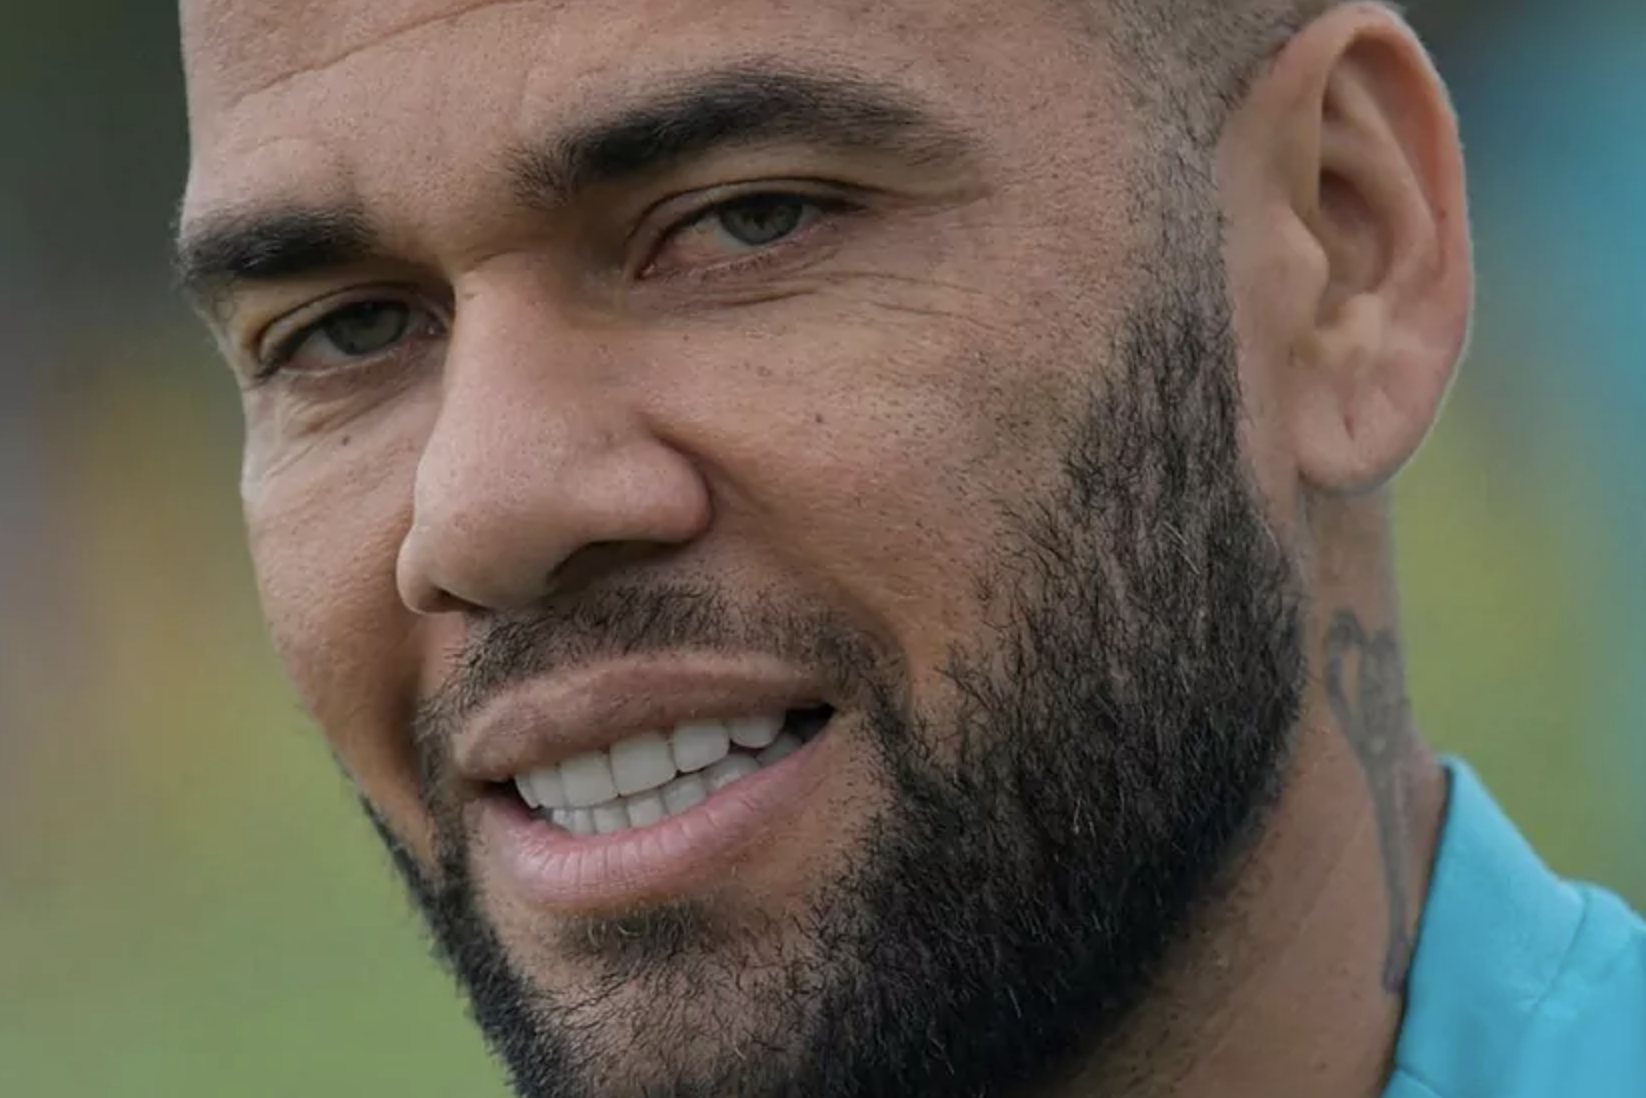 Dani Alves tries to use his kids to get out of jail